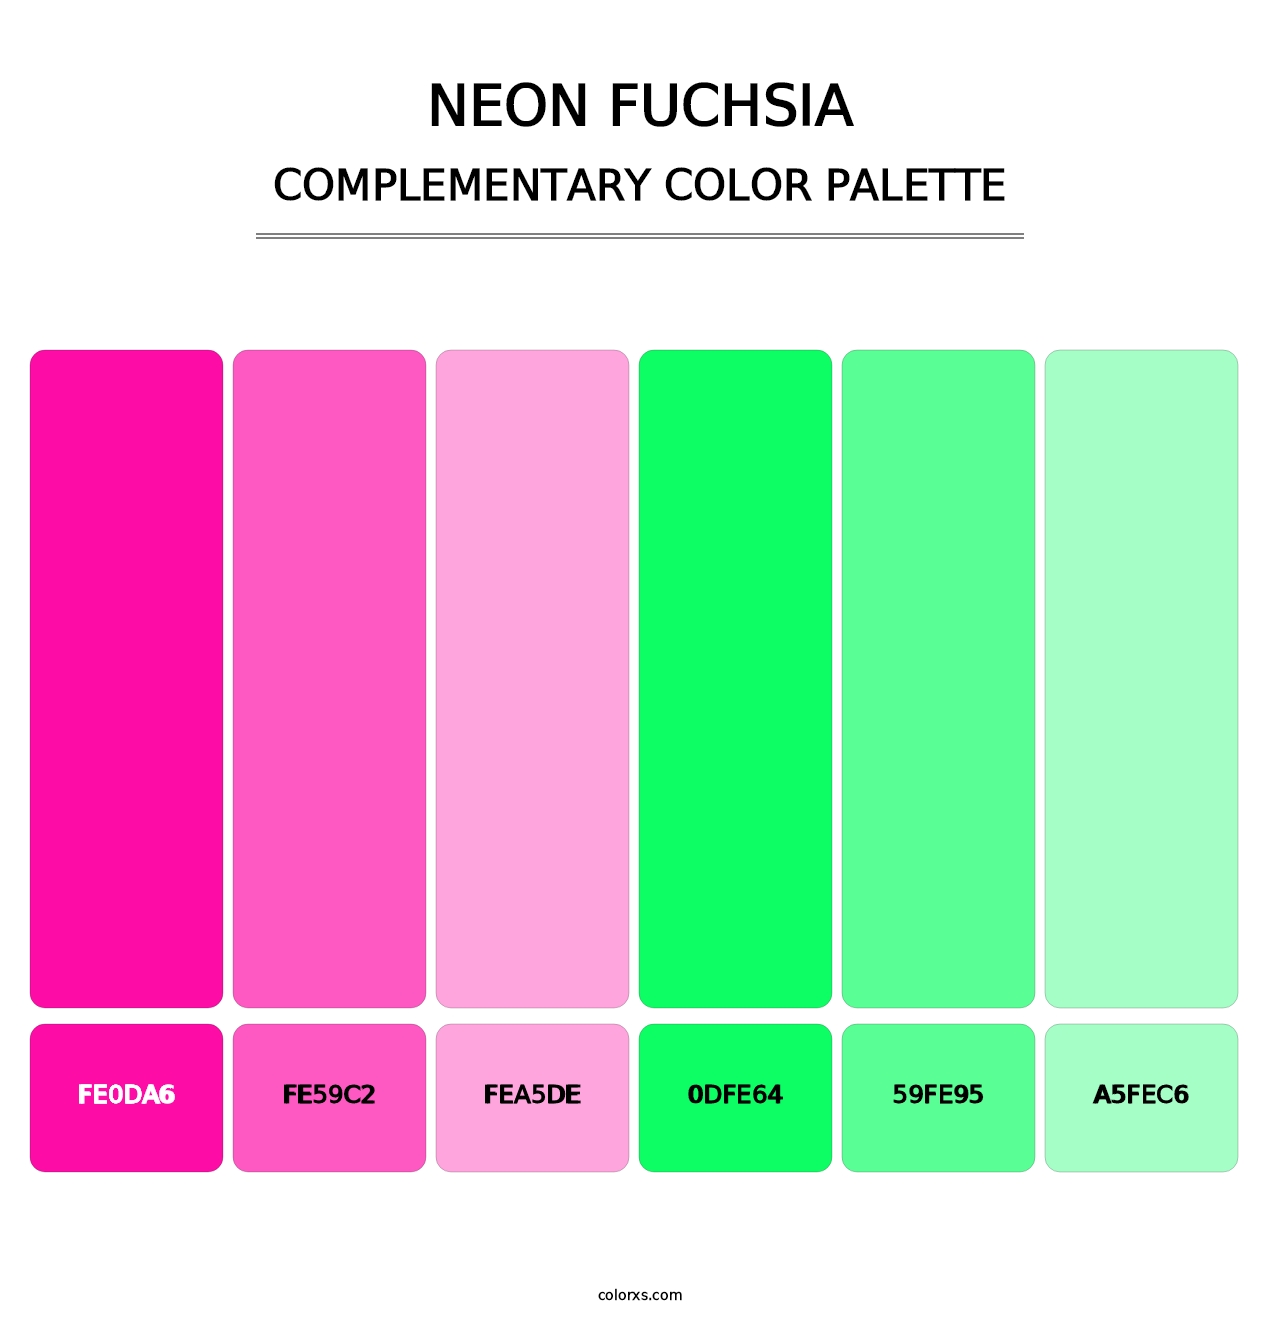 Neon Fuchsia - Complementary Color Palette